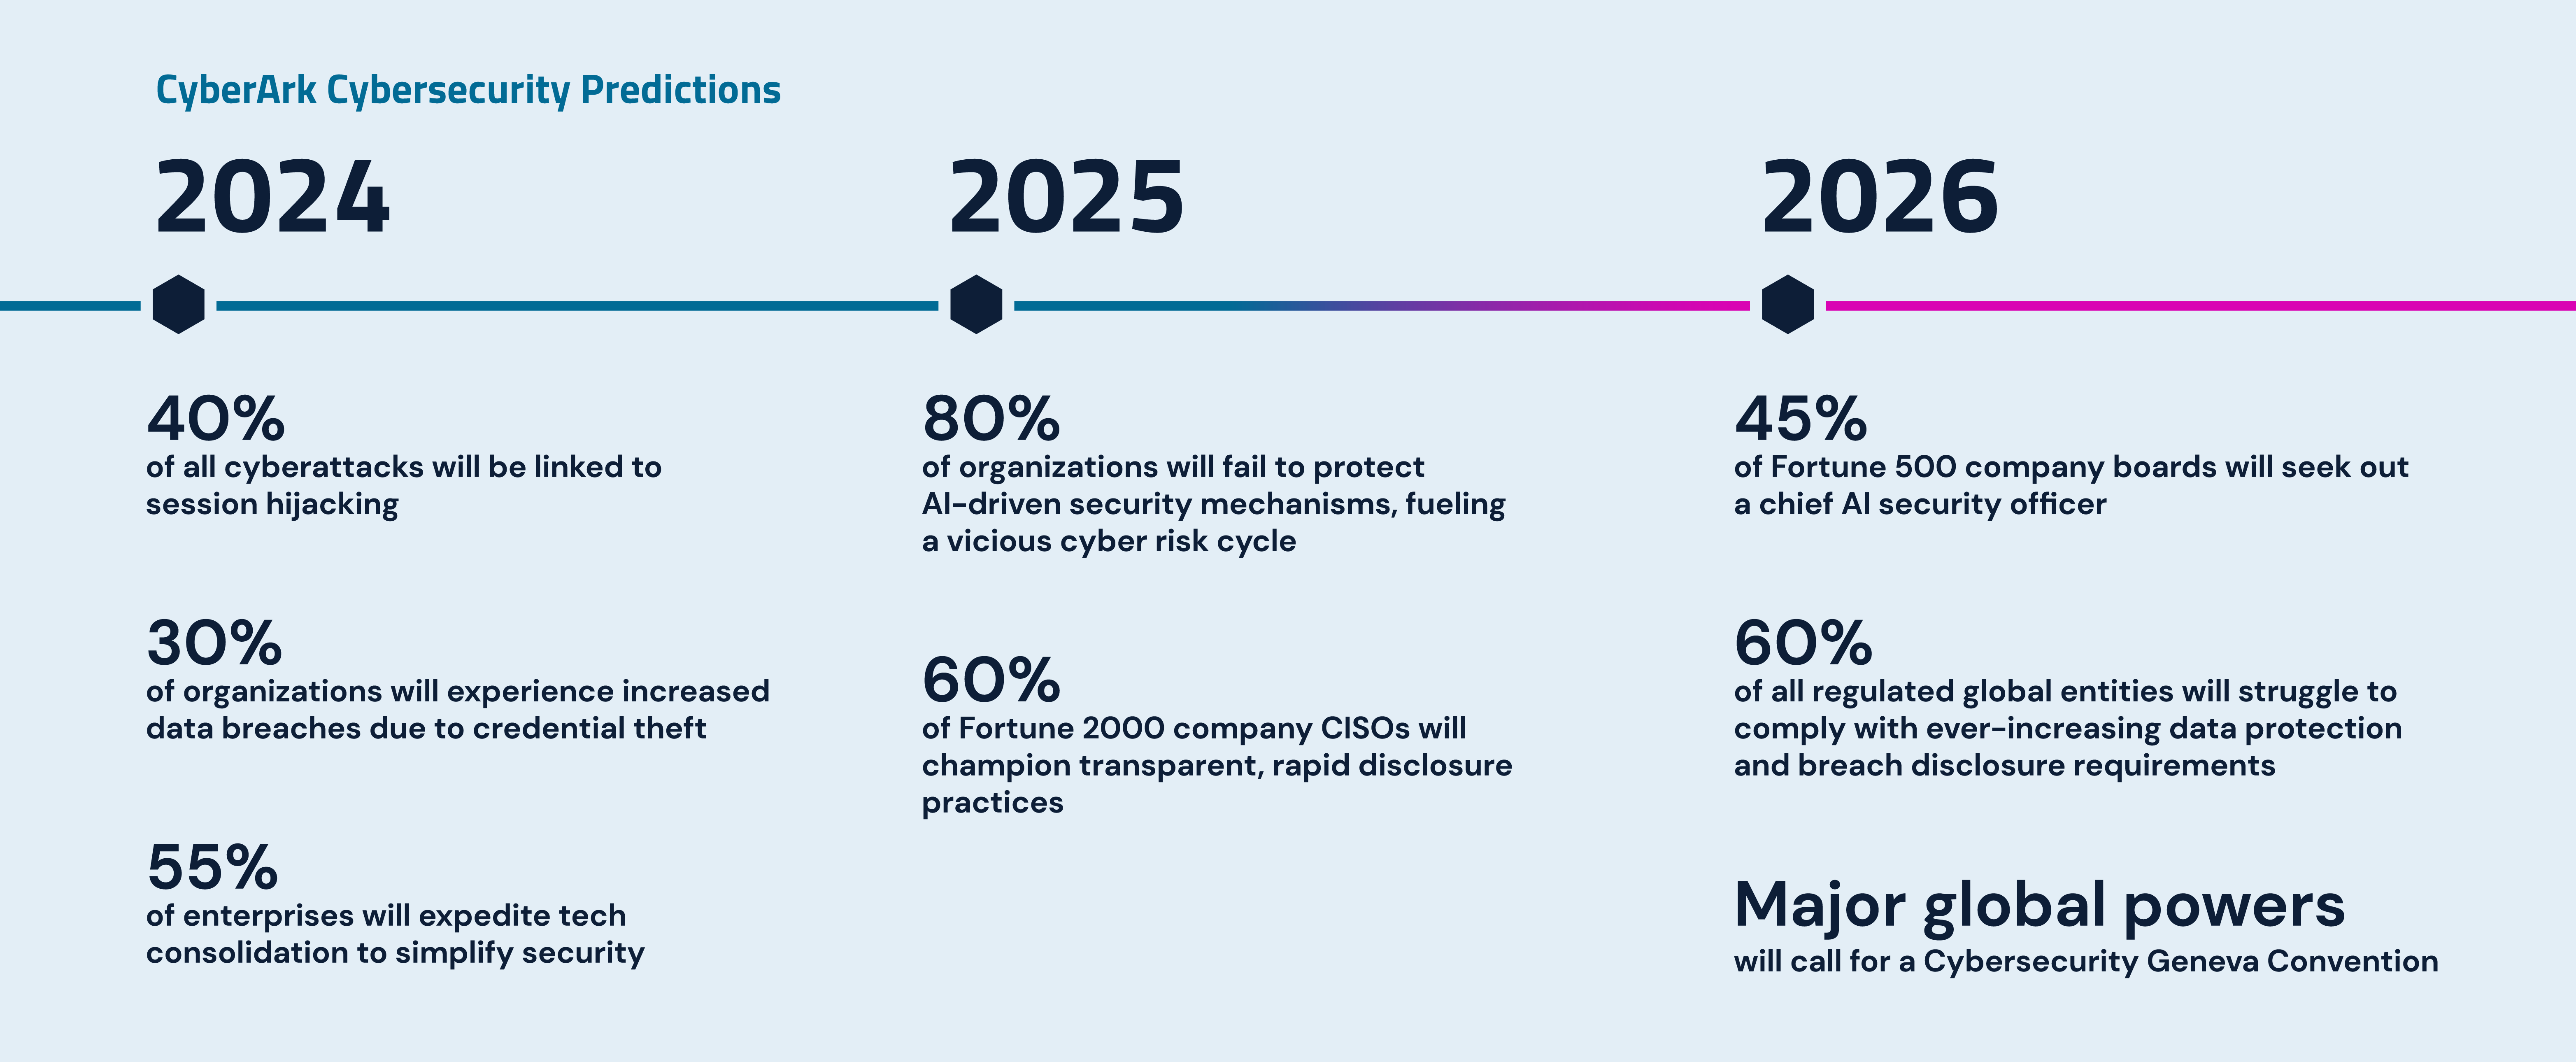 Graphical depiction of CyberArk cybersecurity predictions for 2024, 2025, and 2026. 